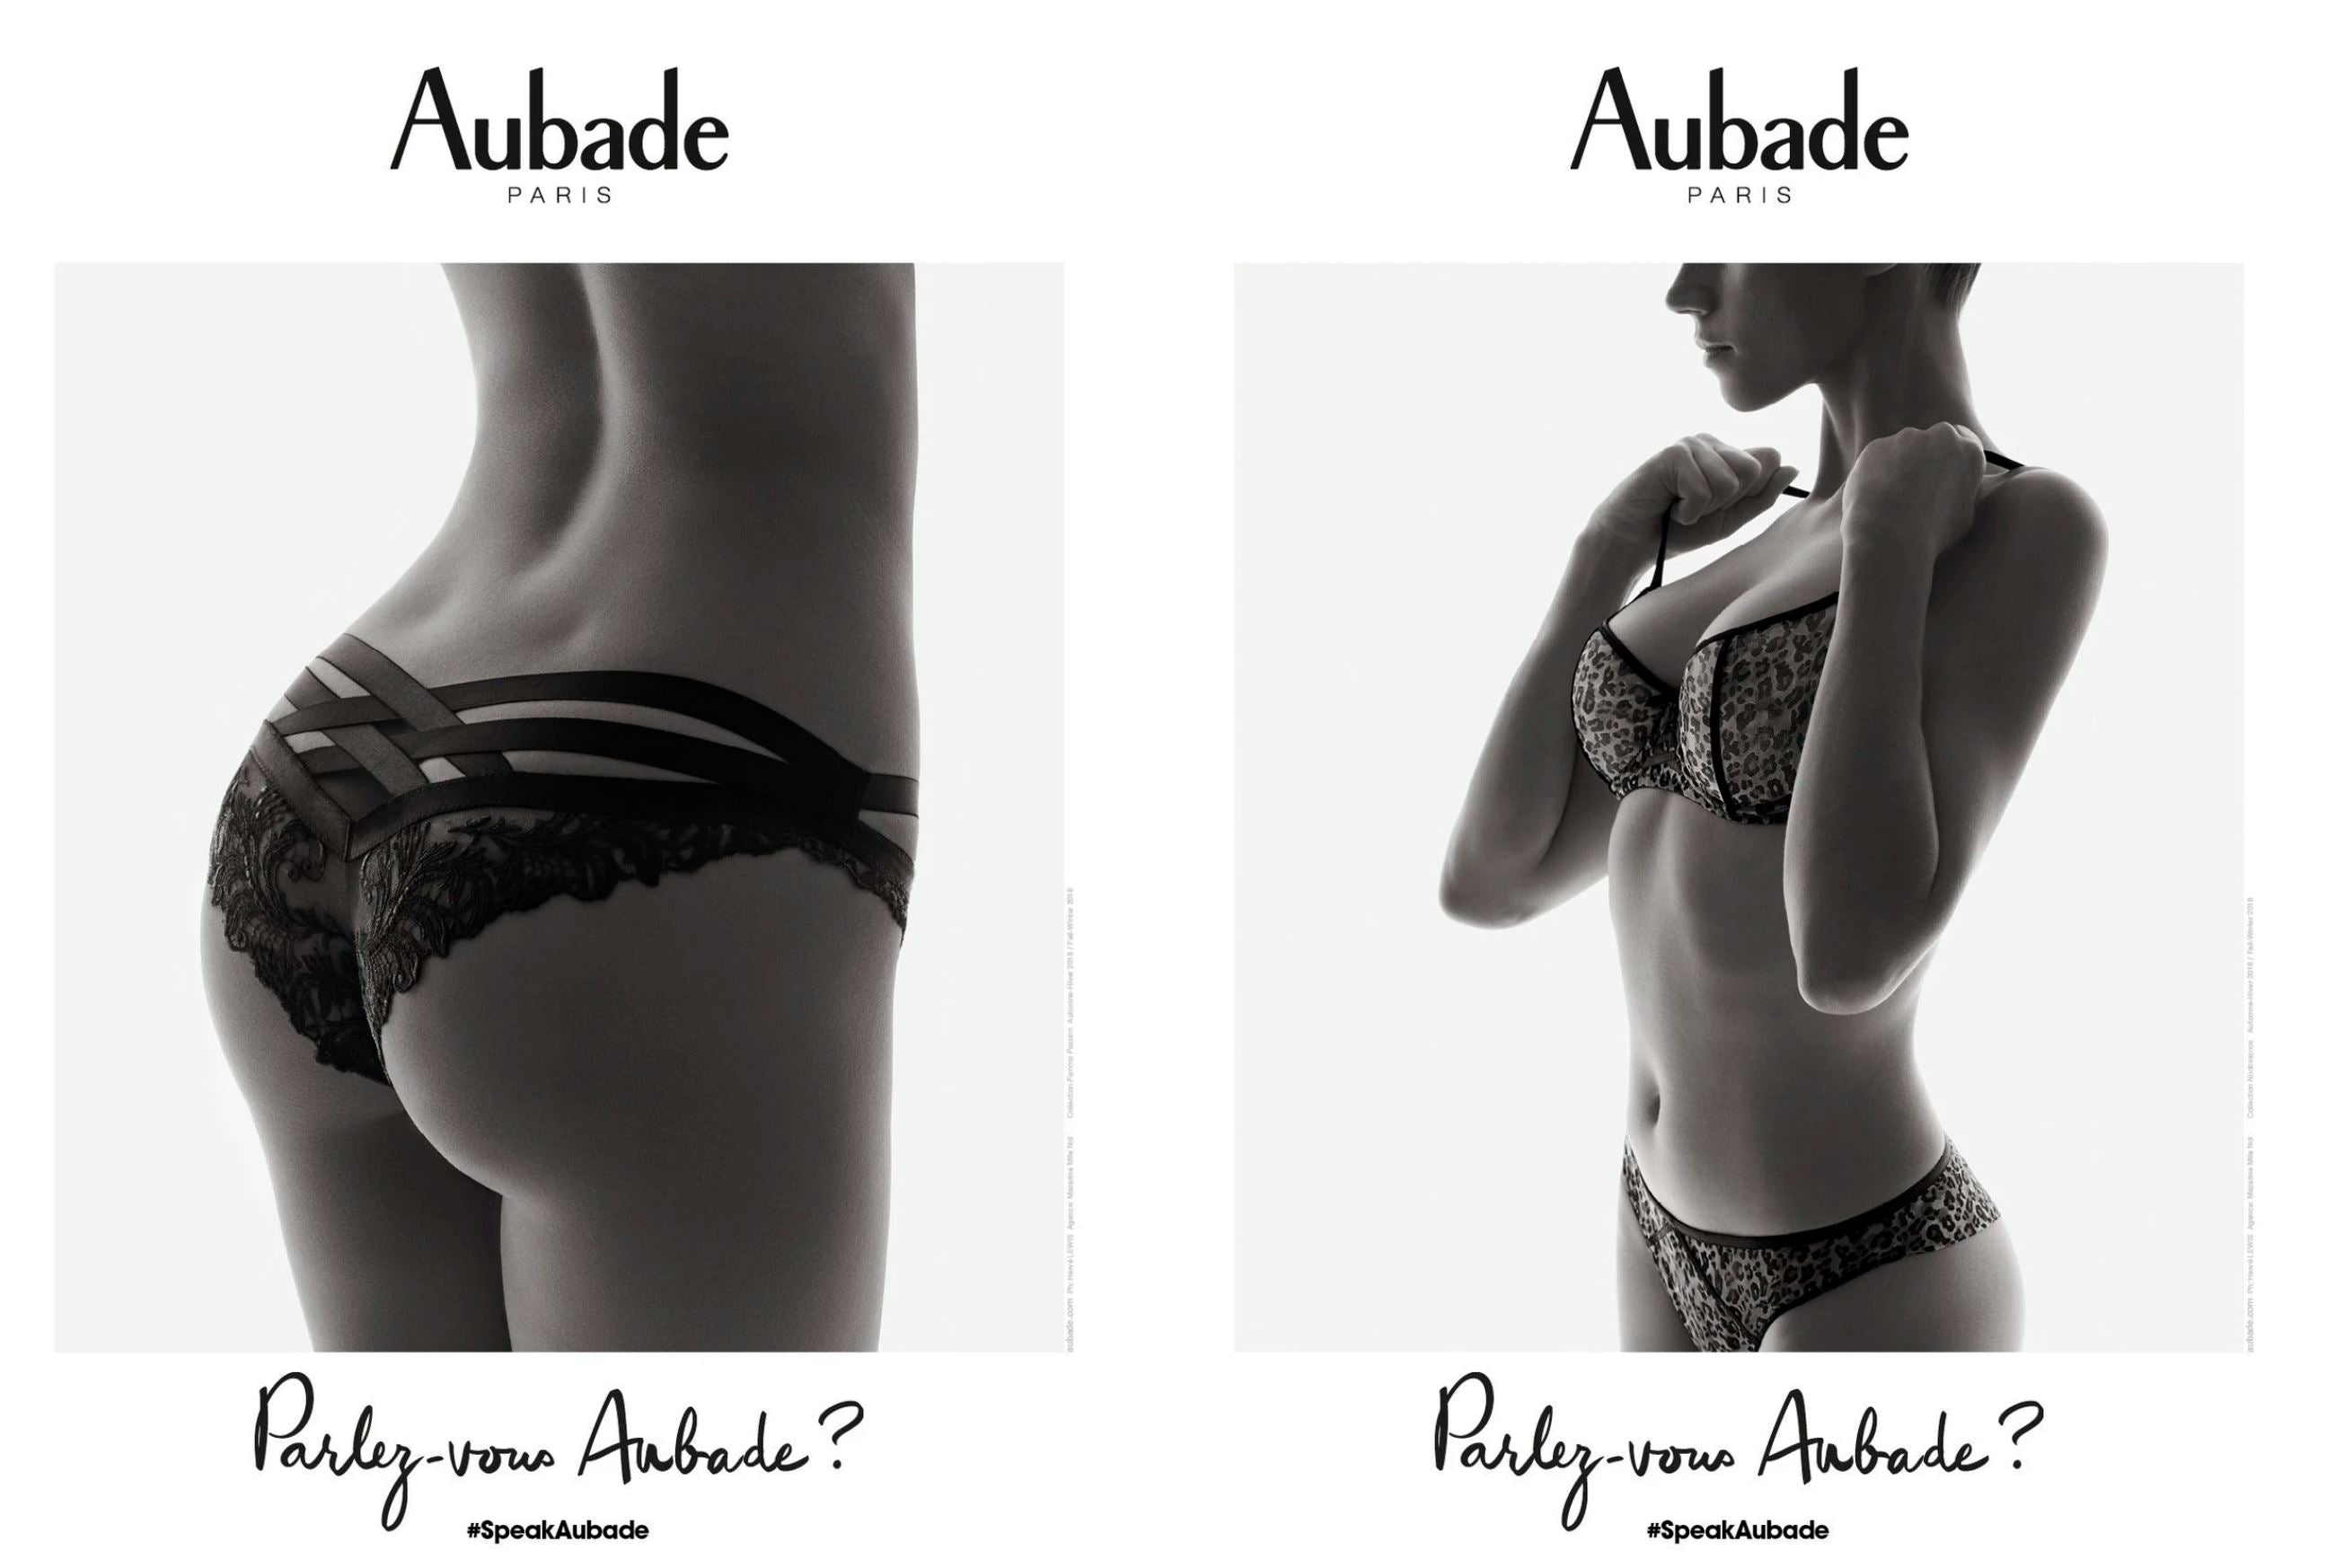 Aubade Lingerie: Shaping women's bodies since 1958